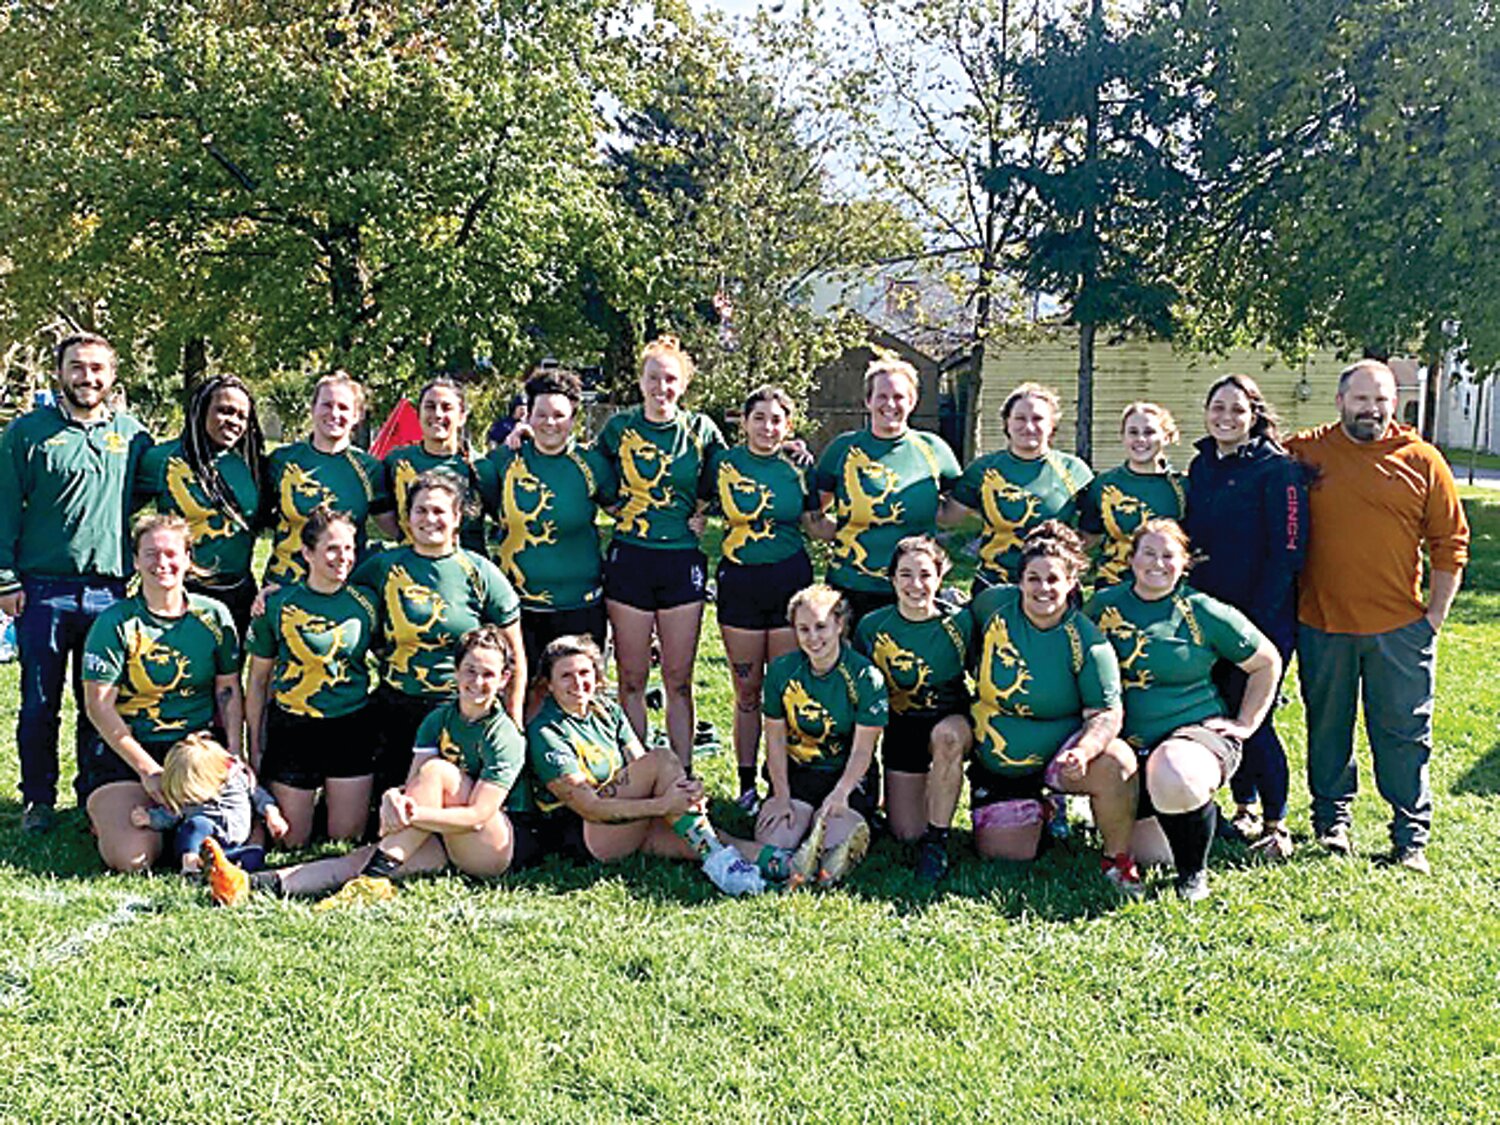 Players and coaches of the Doylestown Rugby women’s team on Oct. 21.